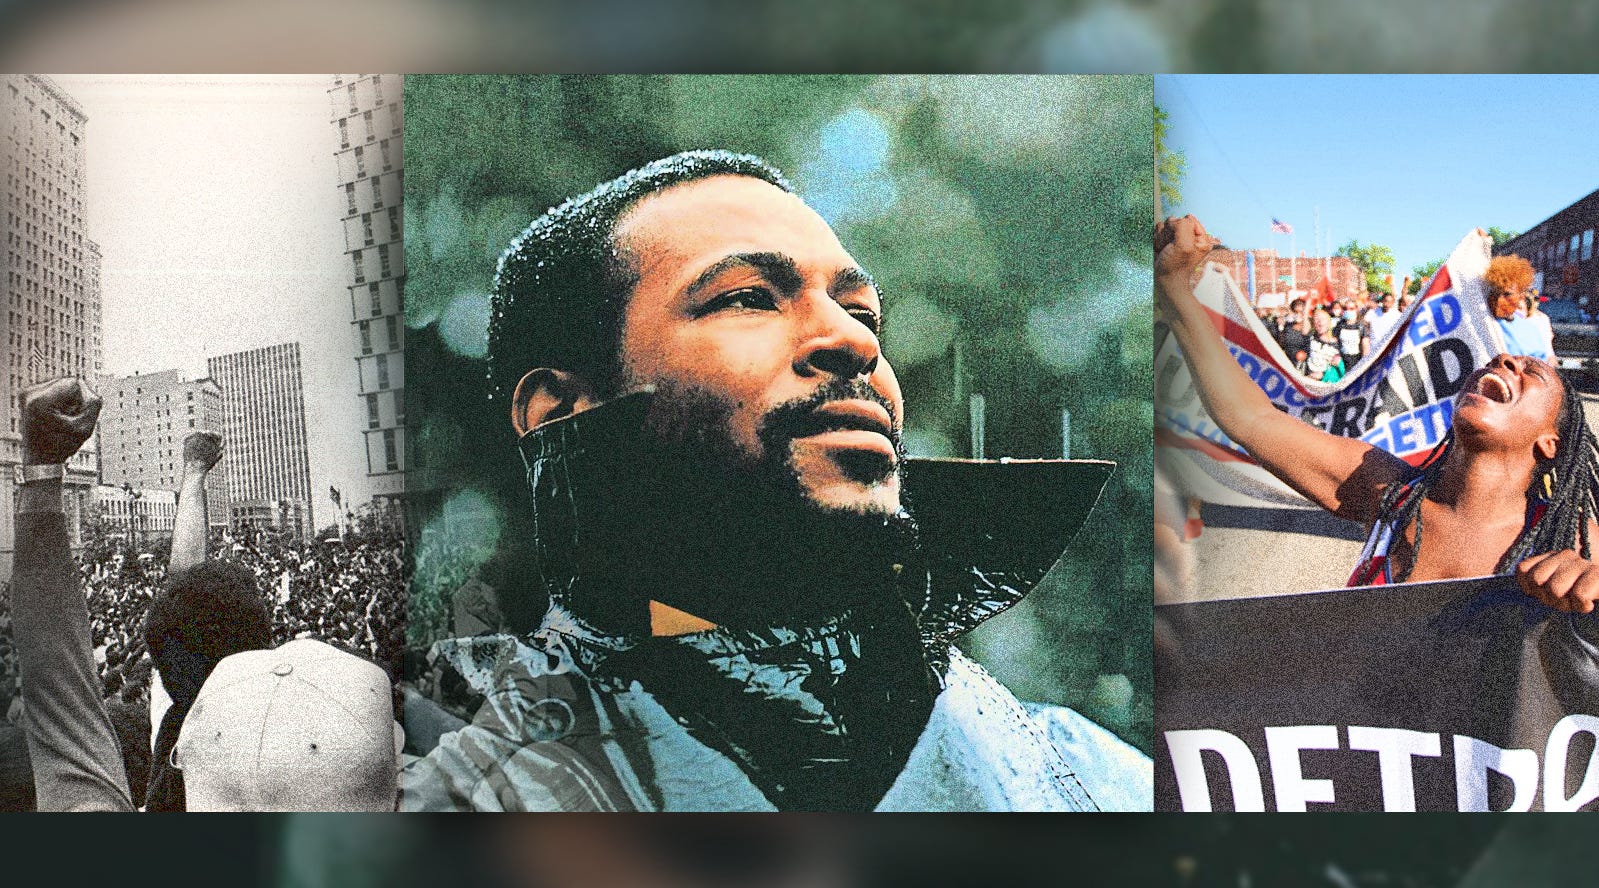 Marvin Gaye's 'What's Going On': Relevant, revealing 50 years later